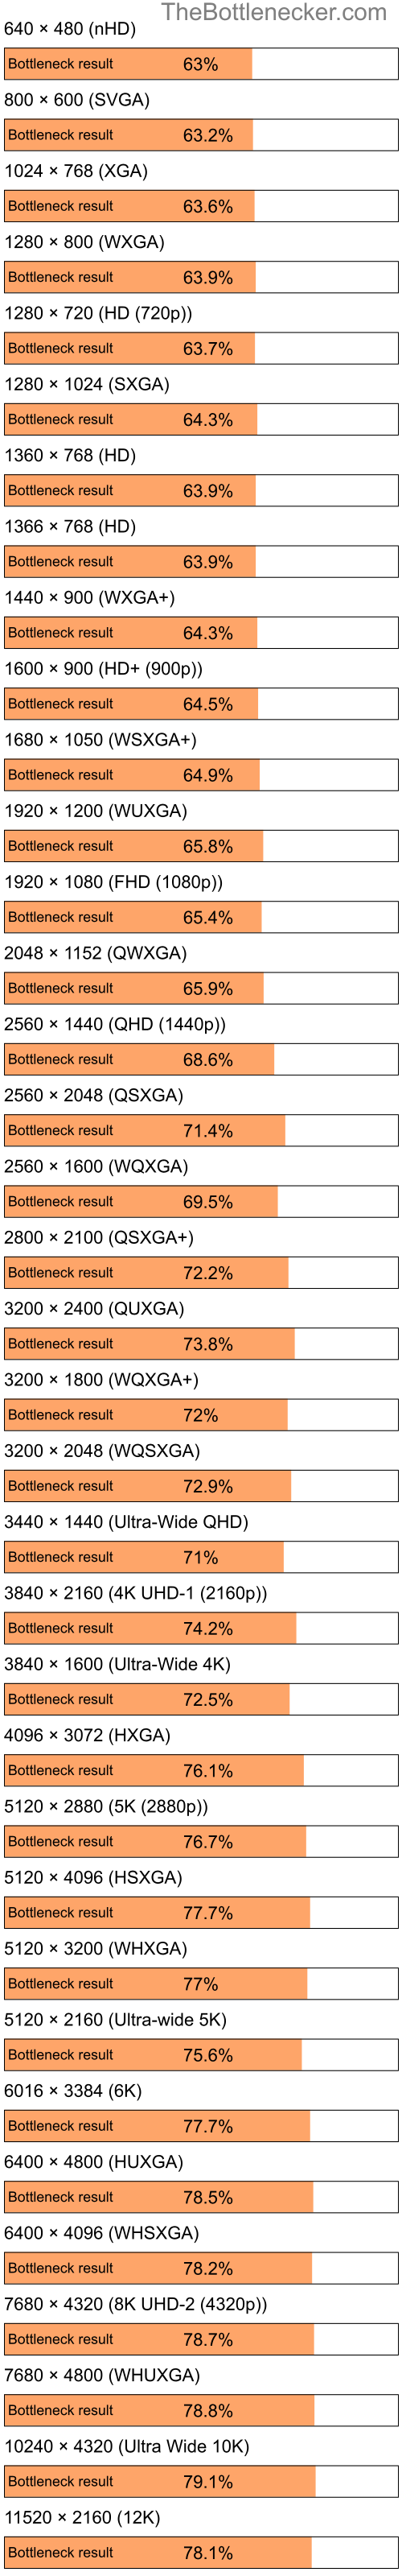 Bottleneck results by resolution for Intel Pentium 4 and NVIDIA GeForce 8400M G in Processor Intense Tasks